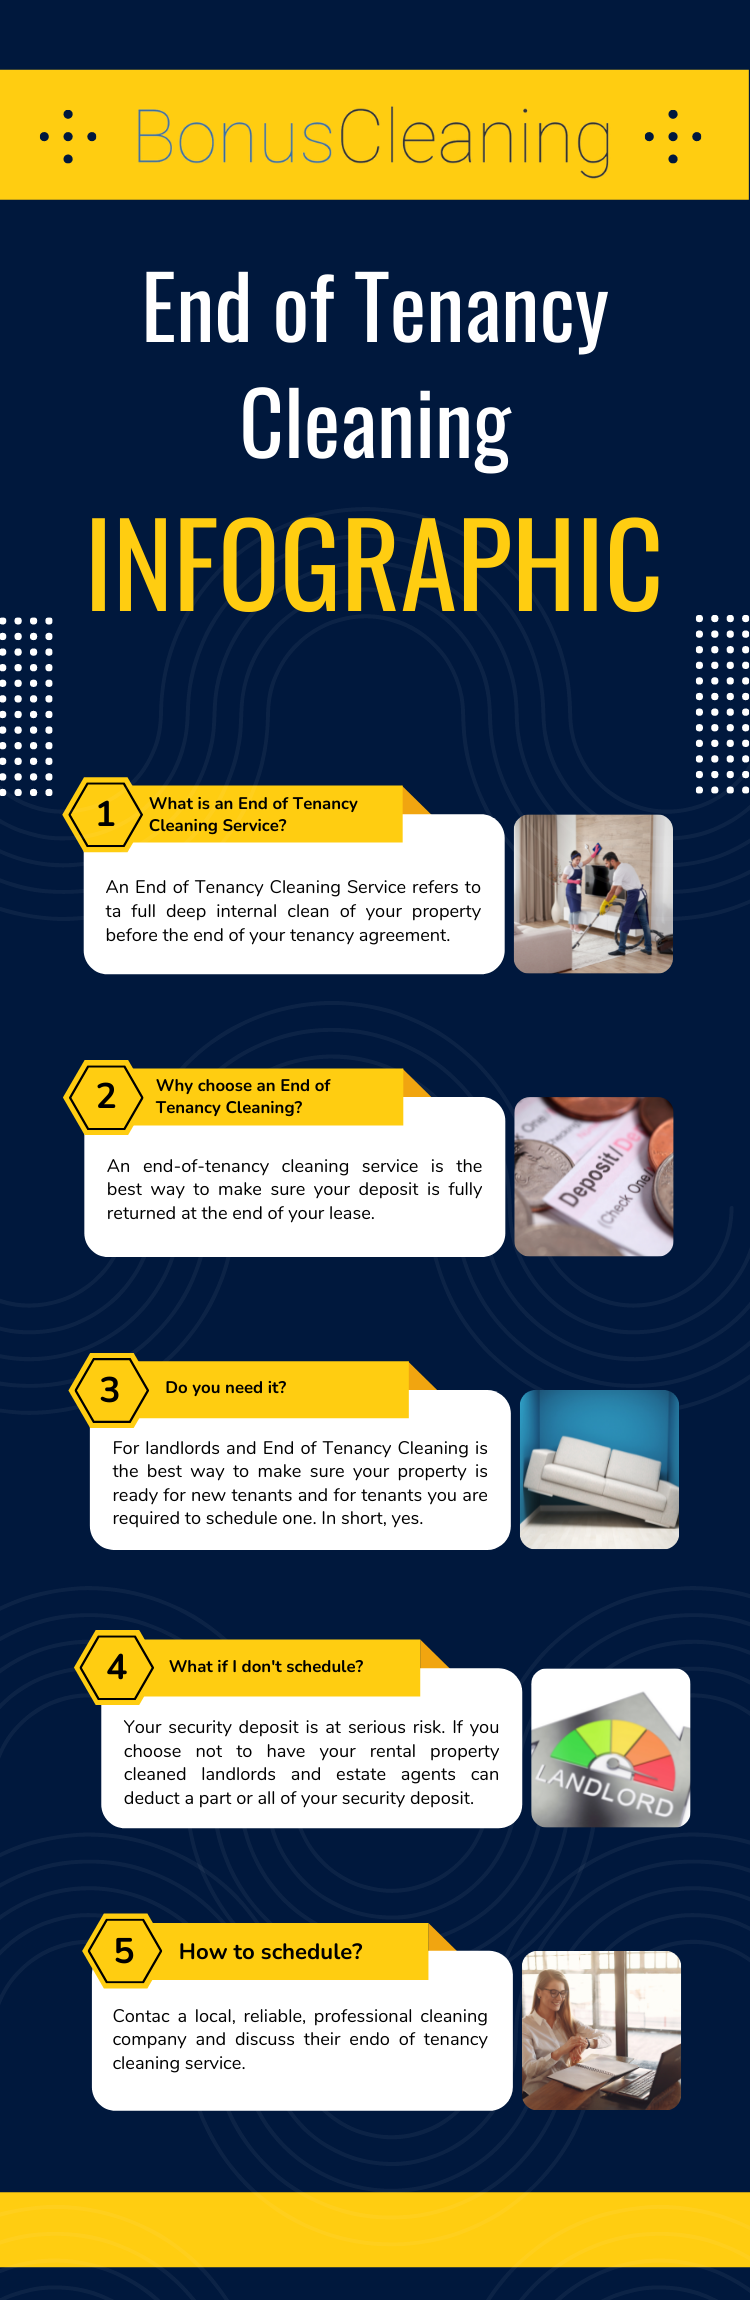 end of tenancy cleaning infographic 1